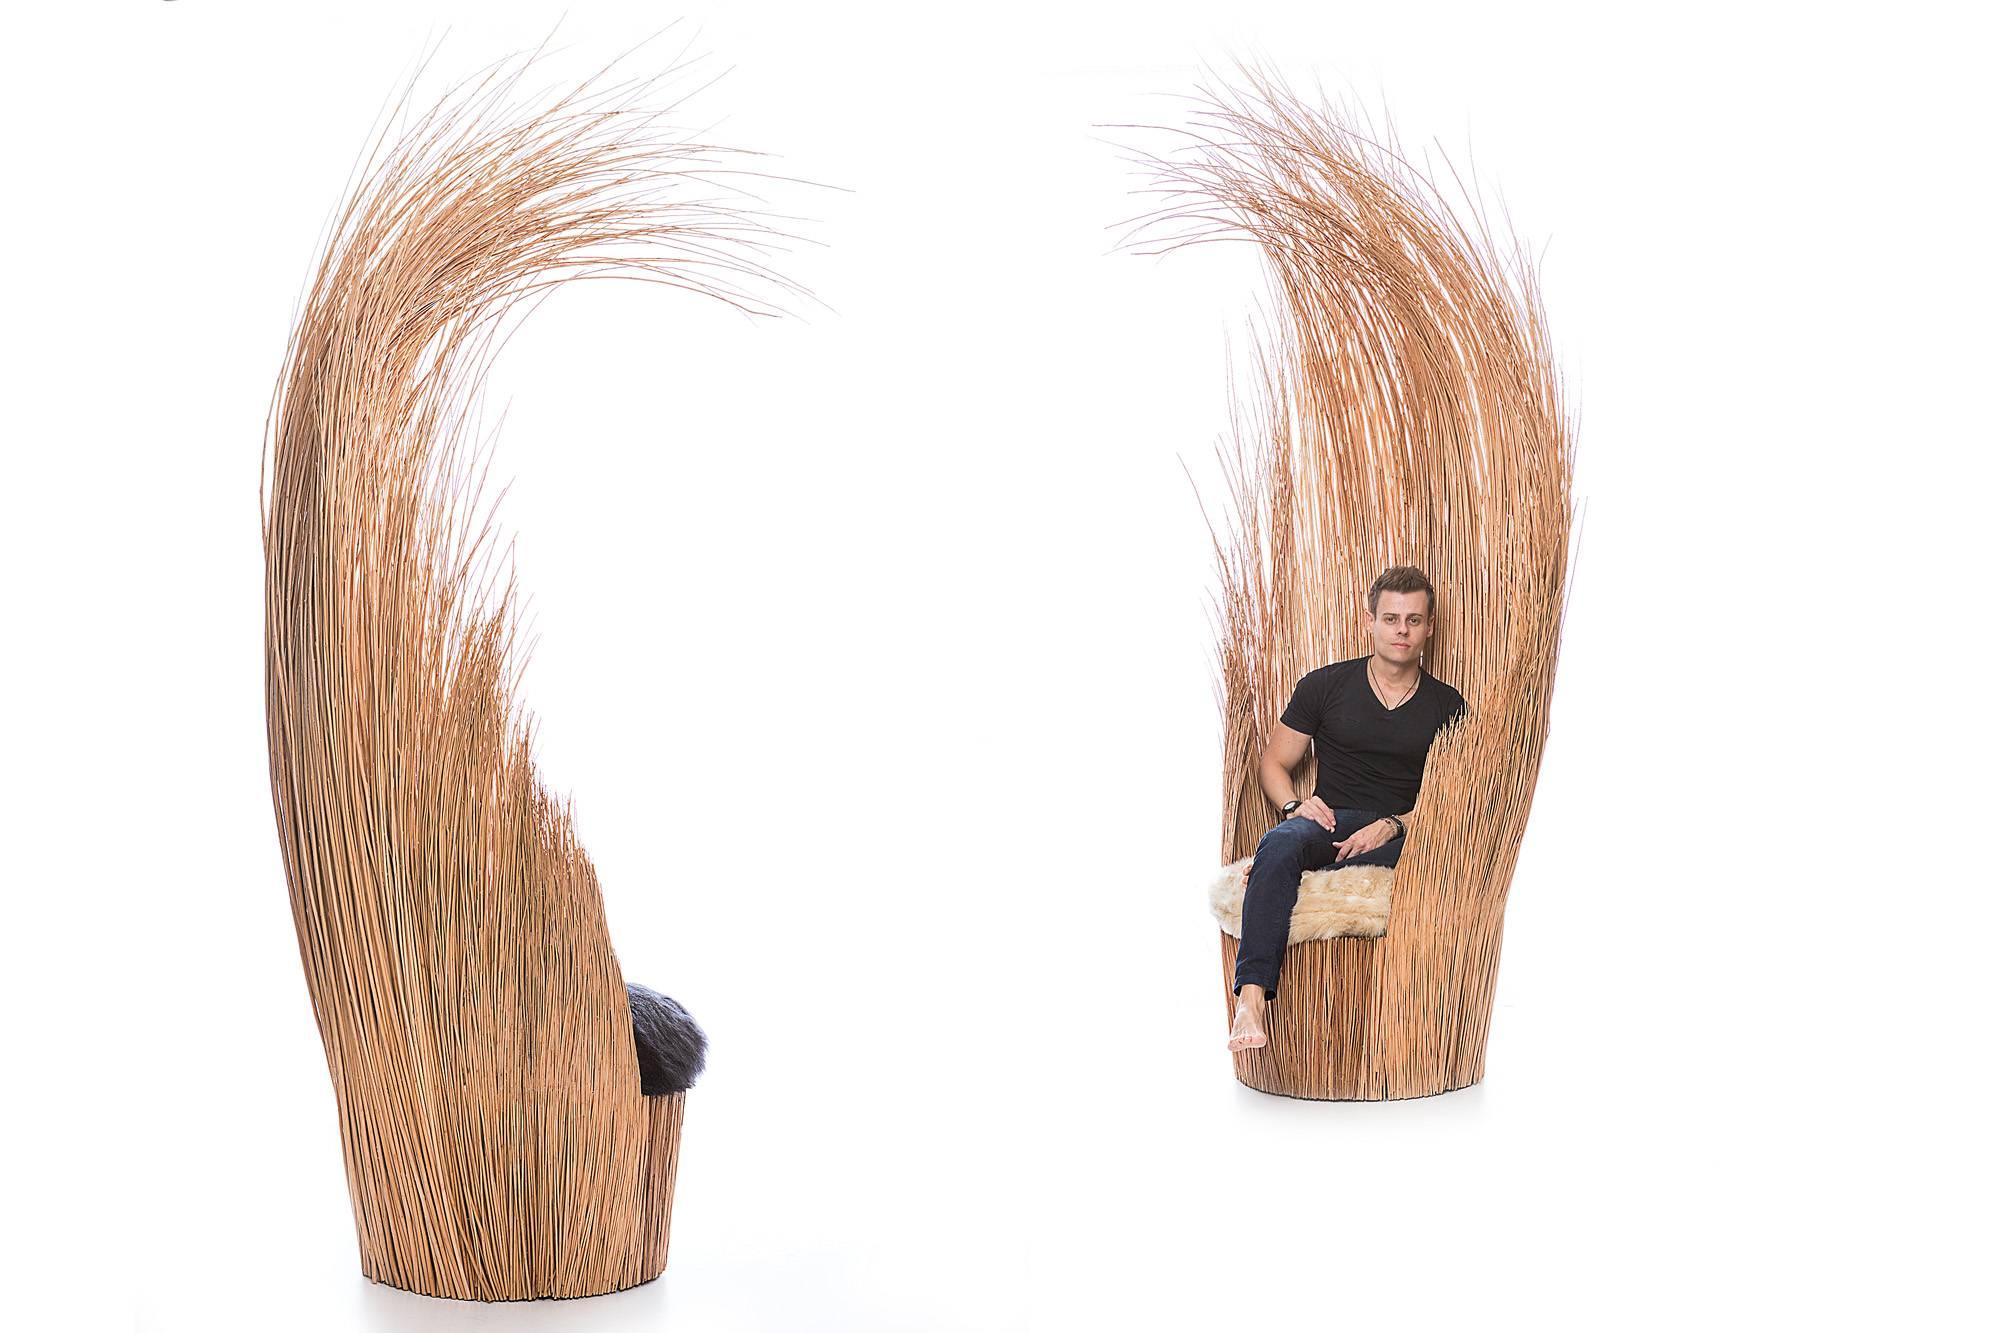 Savana Armchair in Natural Wicker, Brazilian Contemporary Style In New Condition For Sale In Sao Paulo, SP